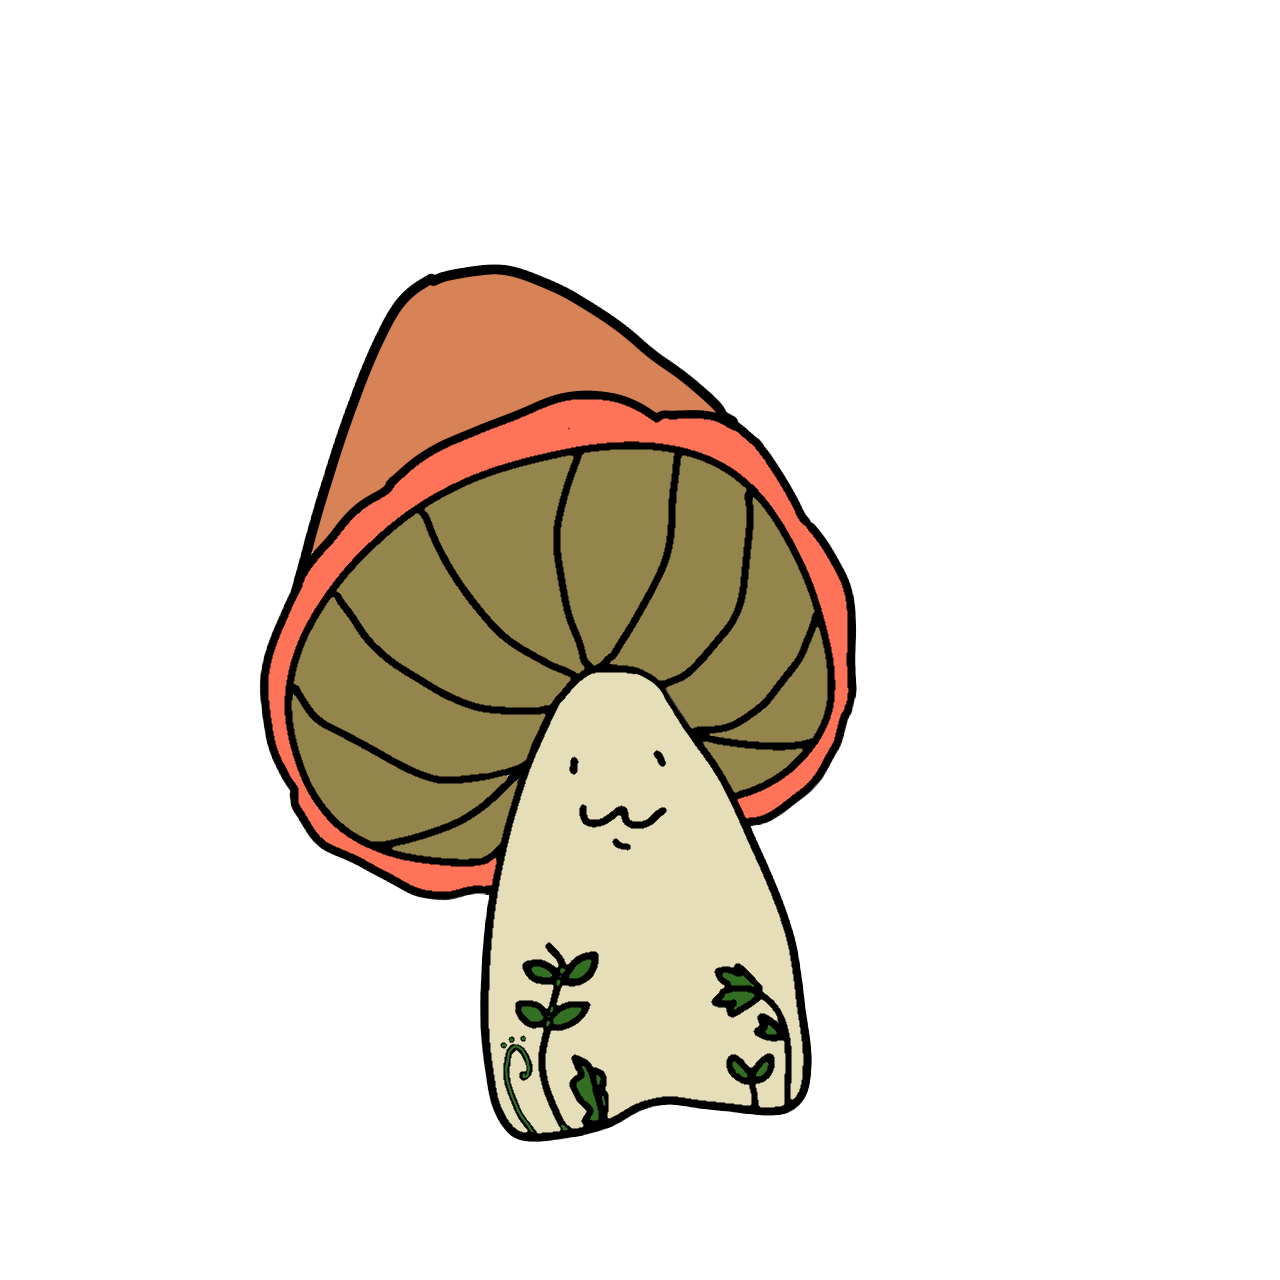 small mushroom fella with an orange cap and a few leaves growing on it.